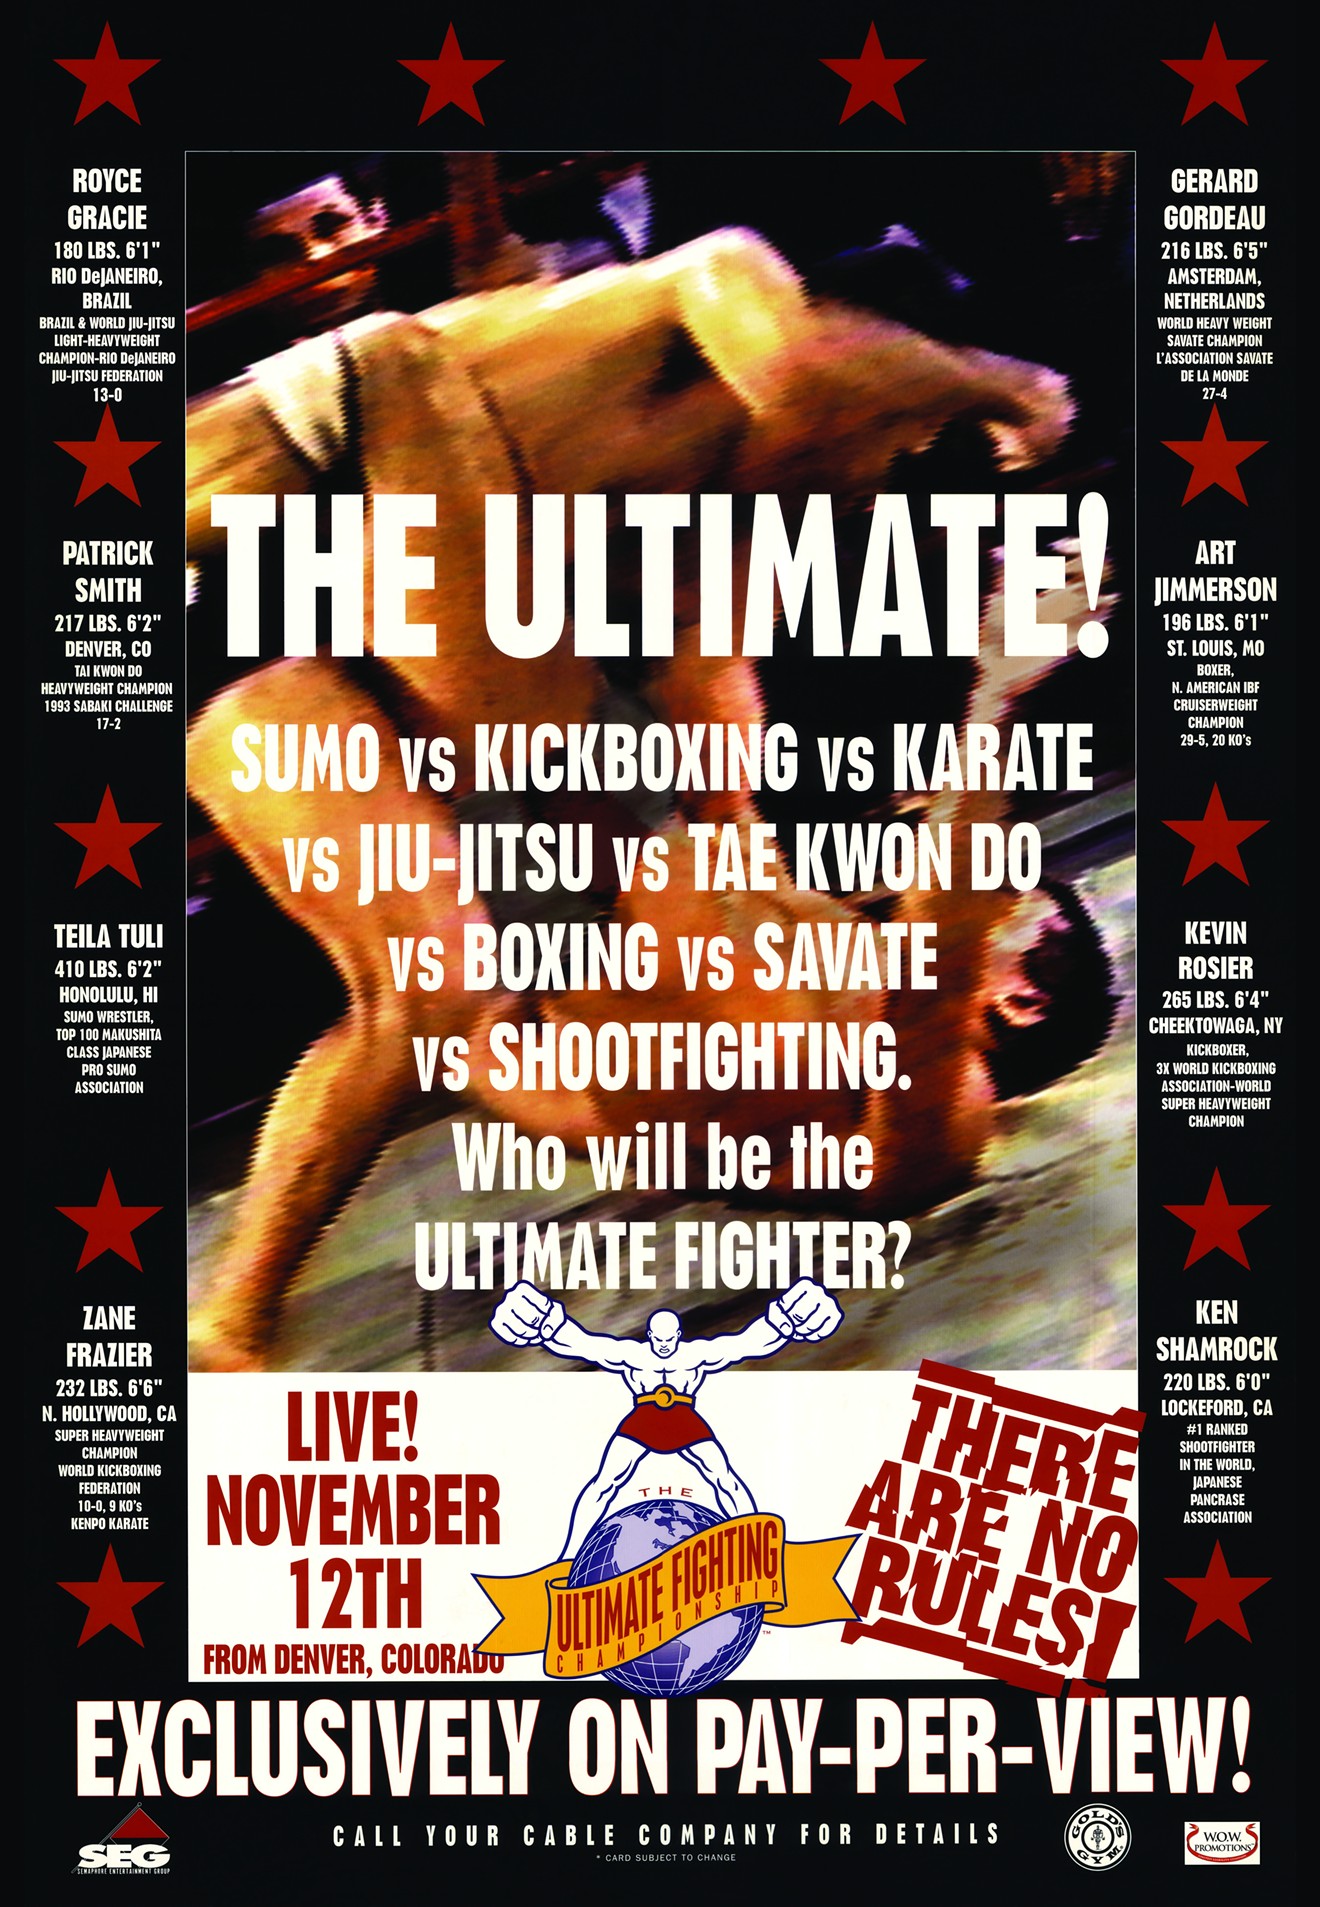 The original promotional poster for UFC One.